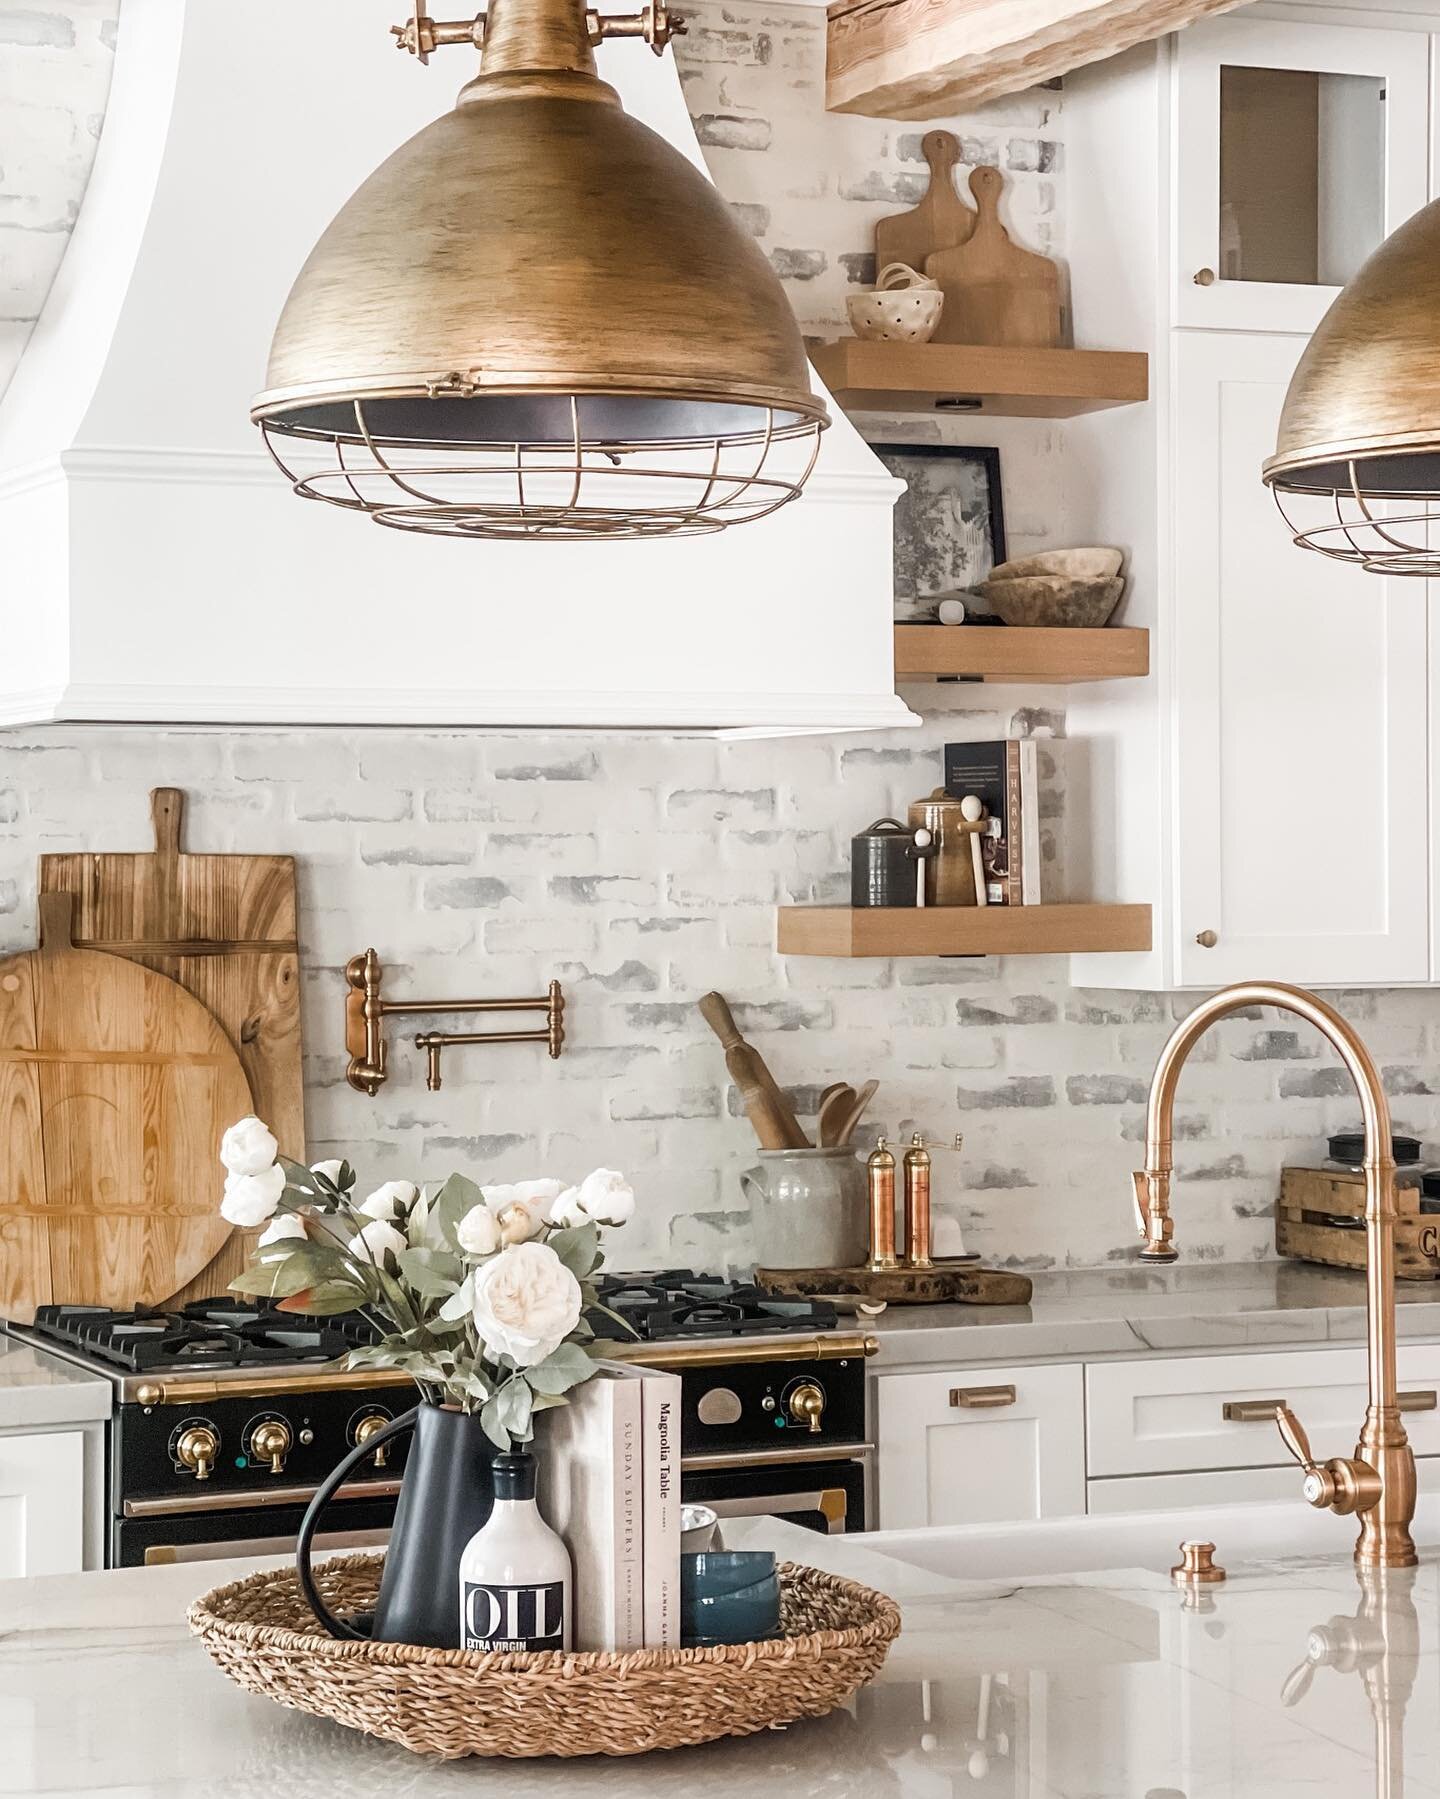 Does anyone else love to cook? It&rsquo;s something I&rsquo;ve always enjoyed, and our kitchen is definitely the heart of the home. Do you have any questions for me about this space ? 

Cabinets are painted Chantilly Lace by Benjamin Moore, island is